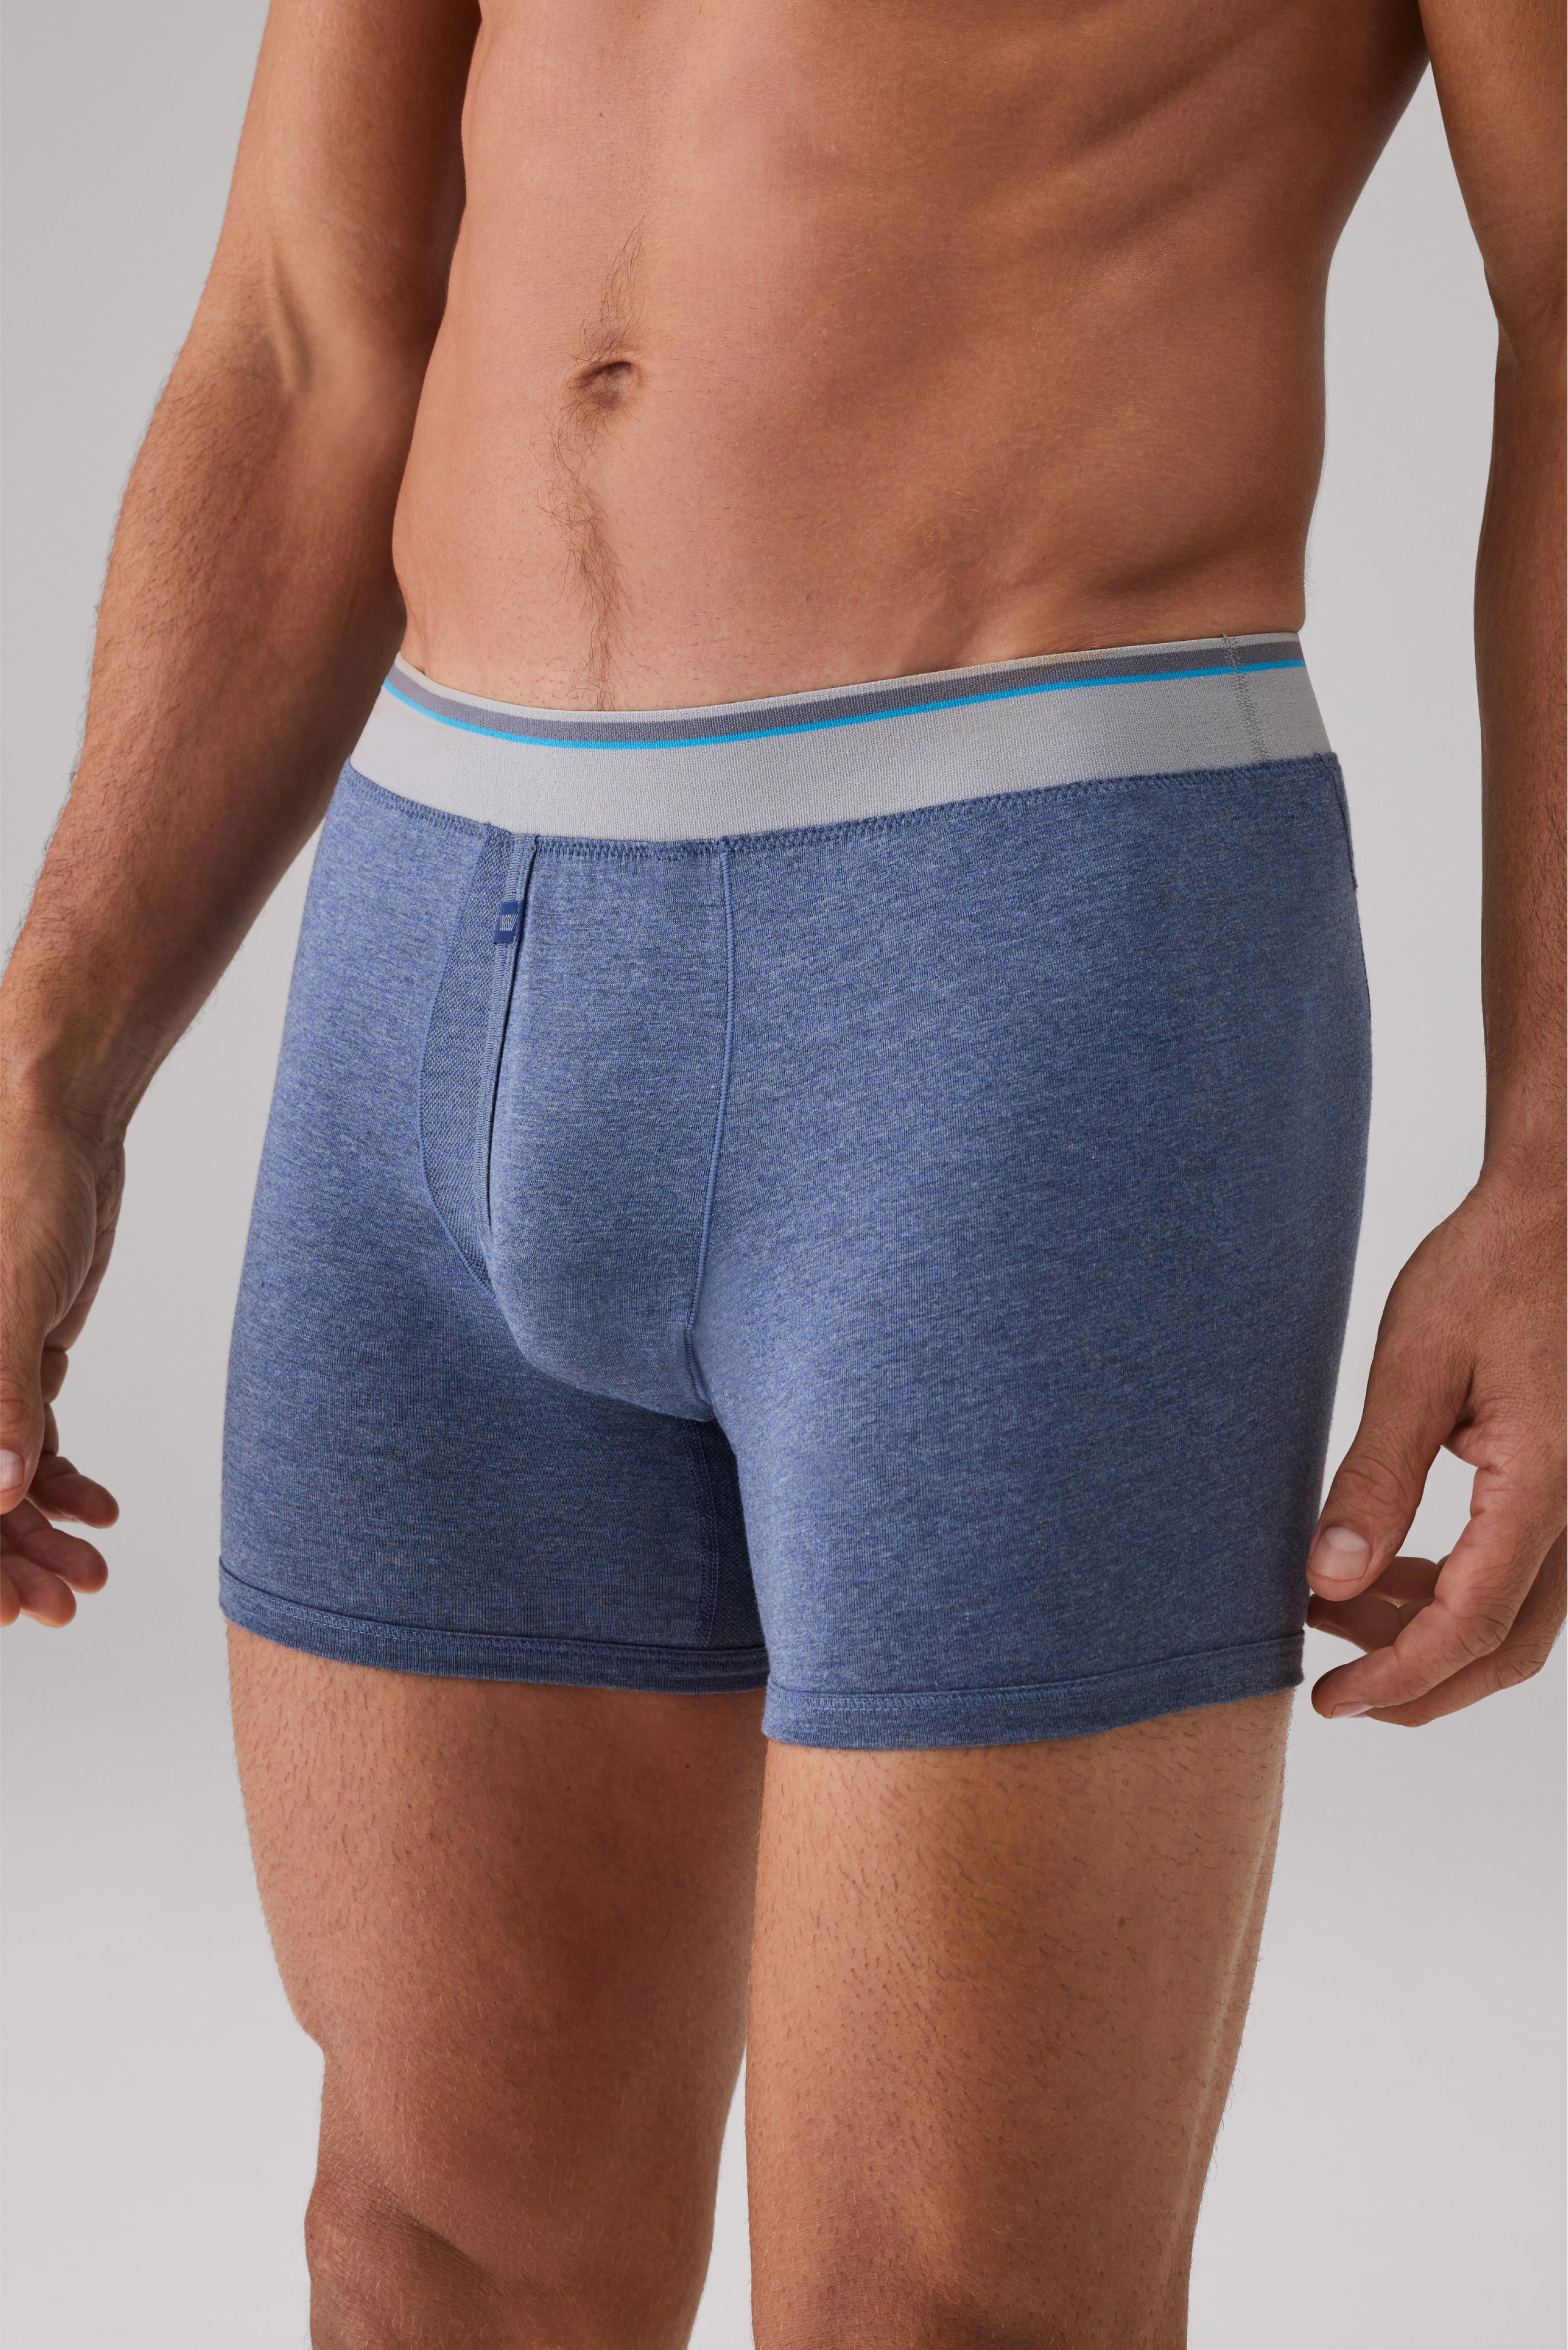 Men's Every Day Kit Boxer Brief 4 Pack MED. HEATHER GREY/BLACK